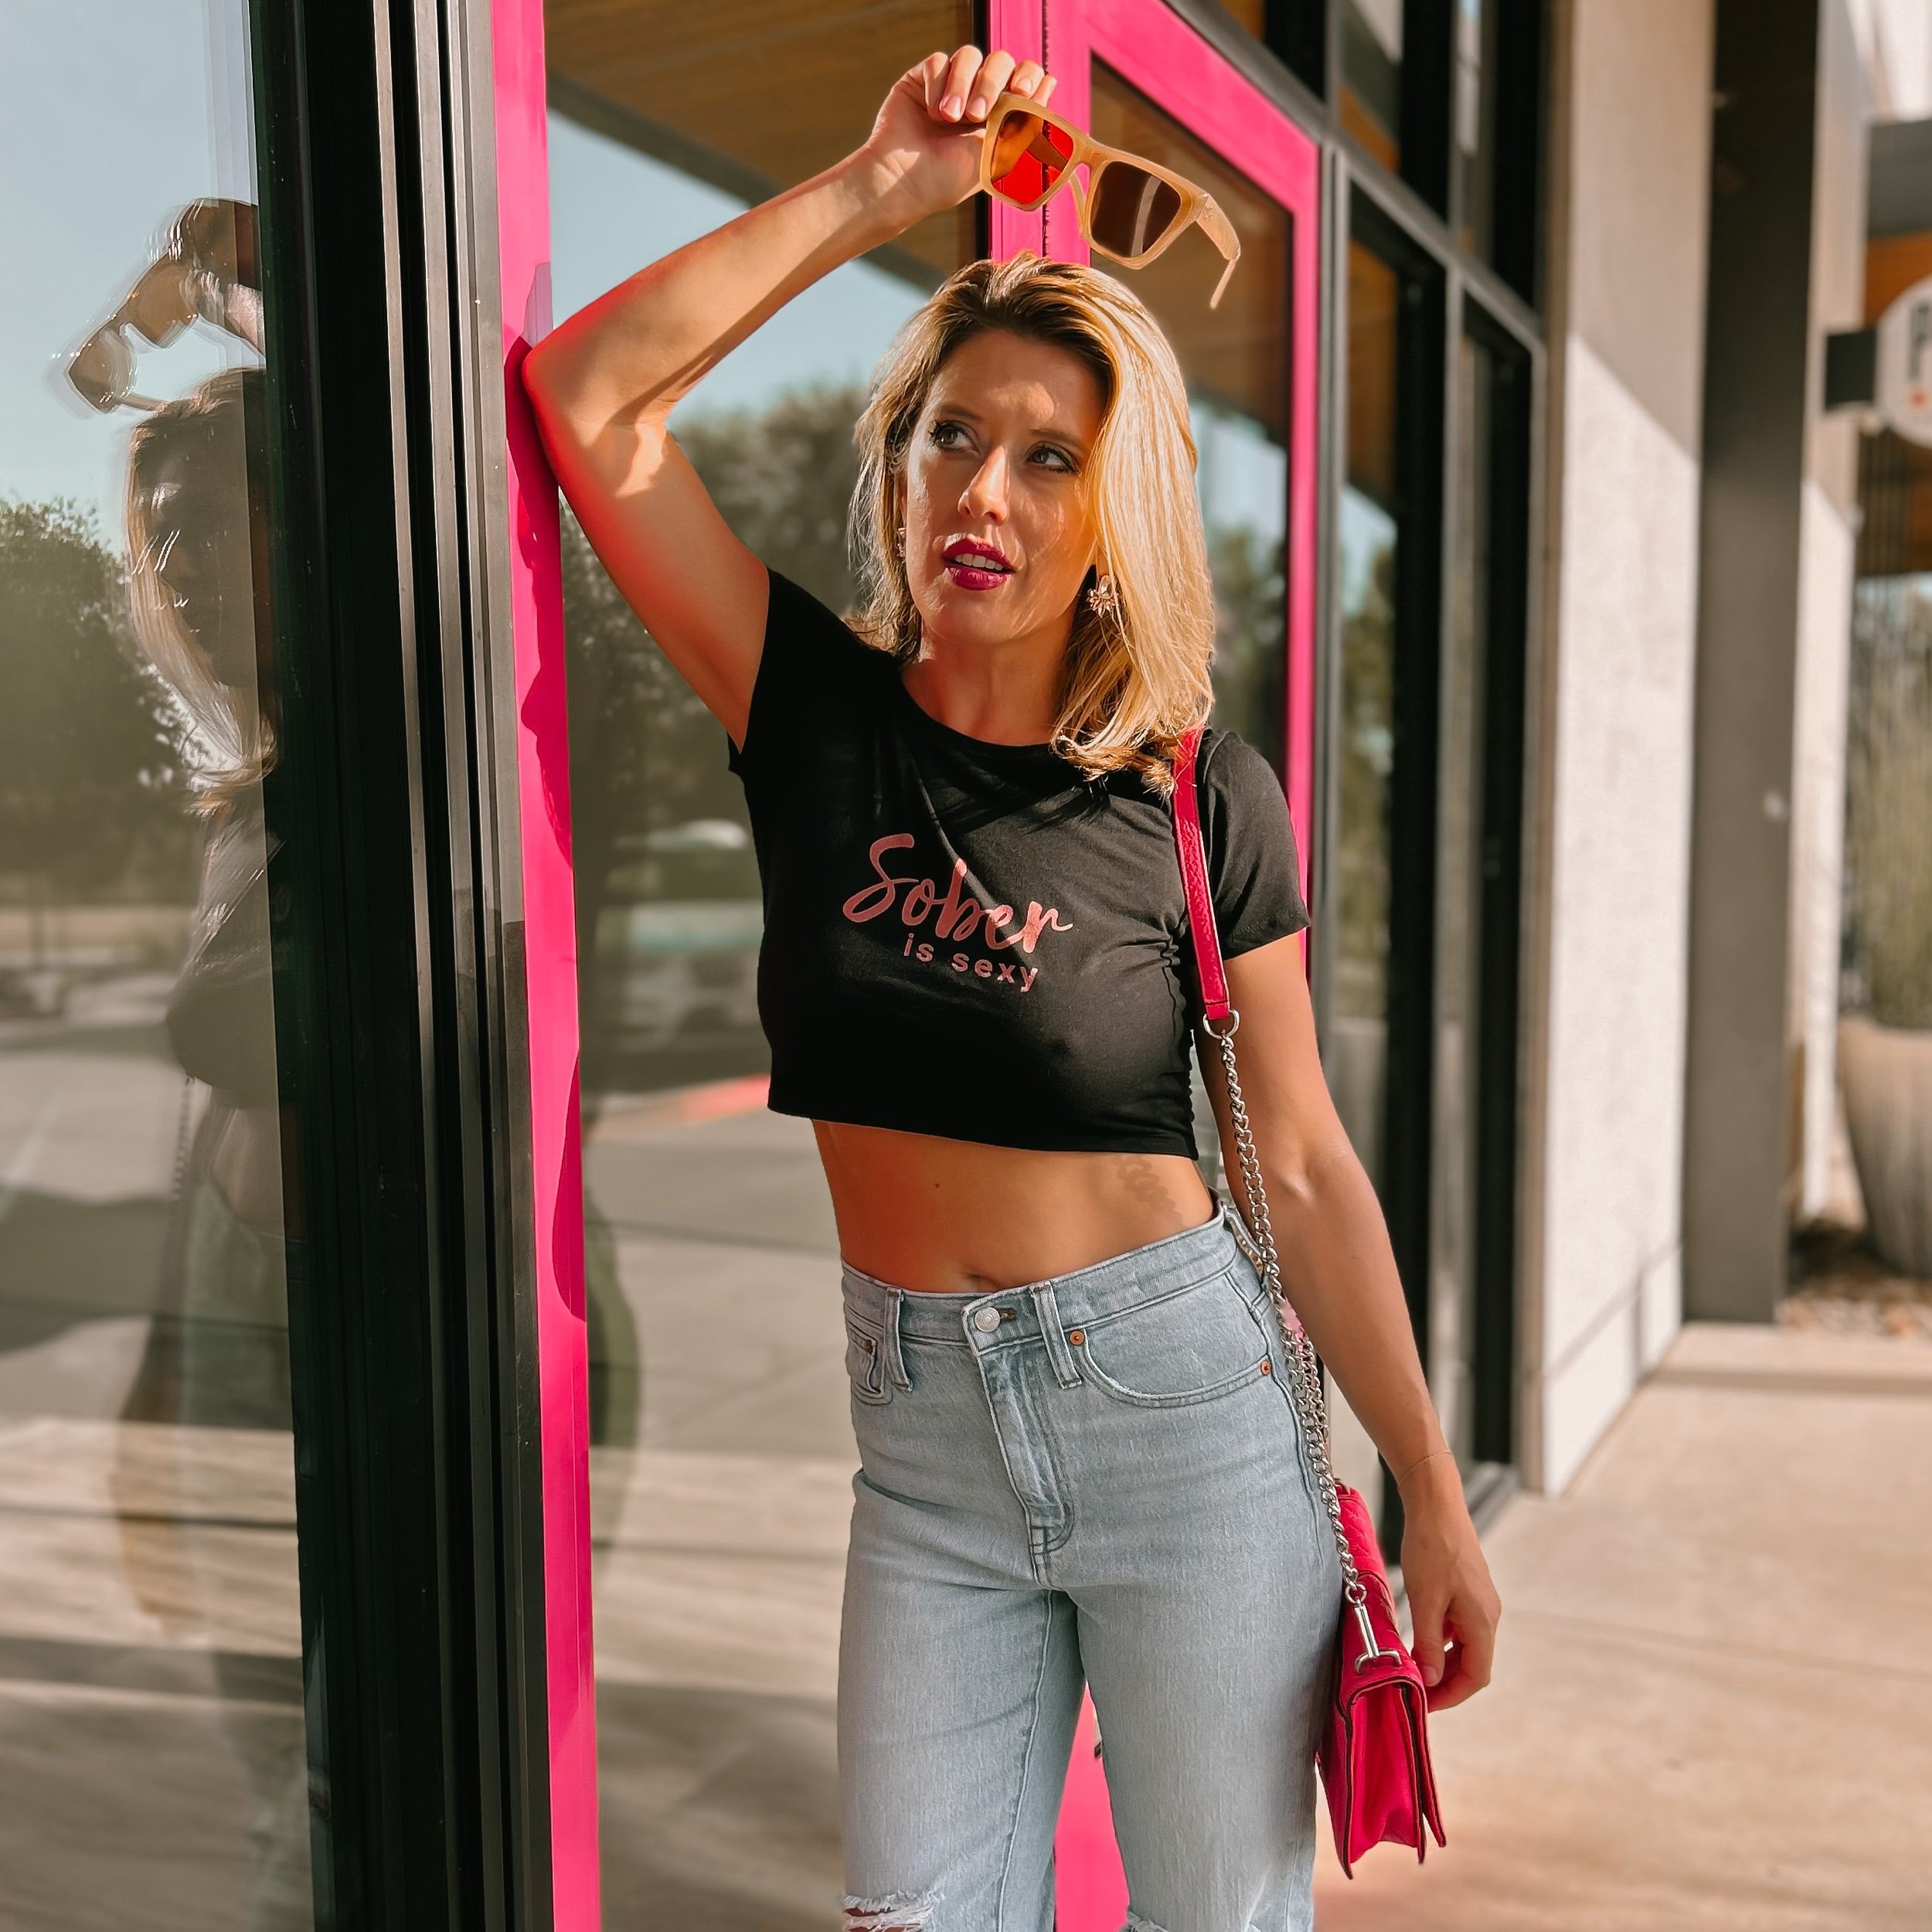 Three Heel Clicks - The New SOBER IS SEXY Cropped Tee Drops Today